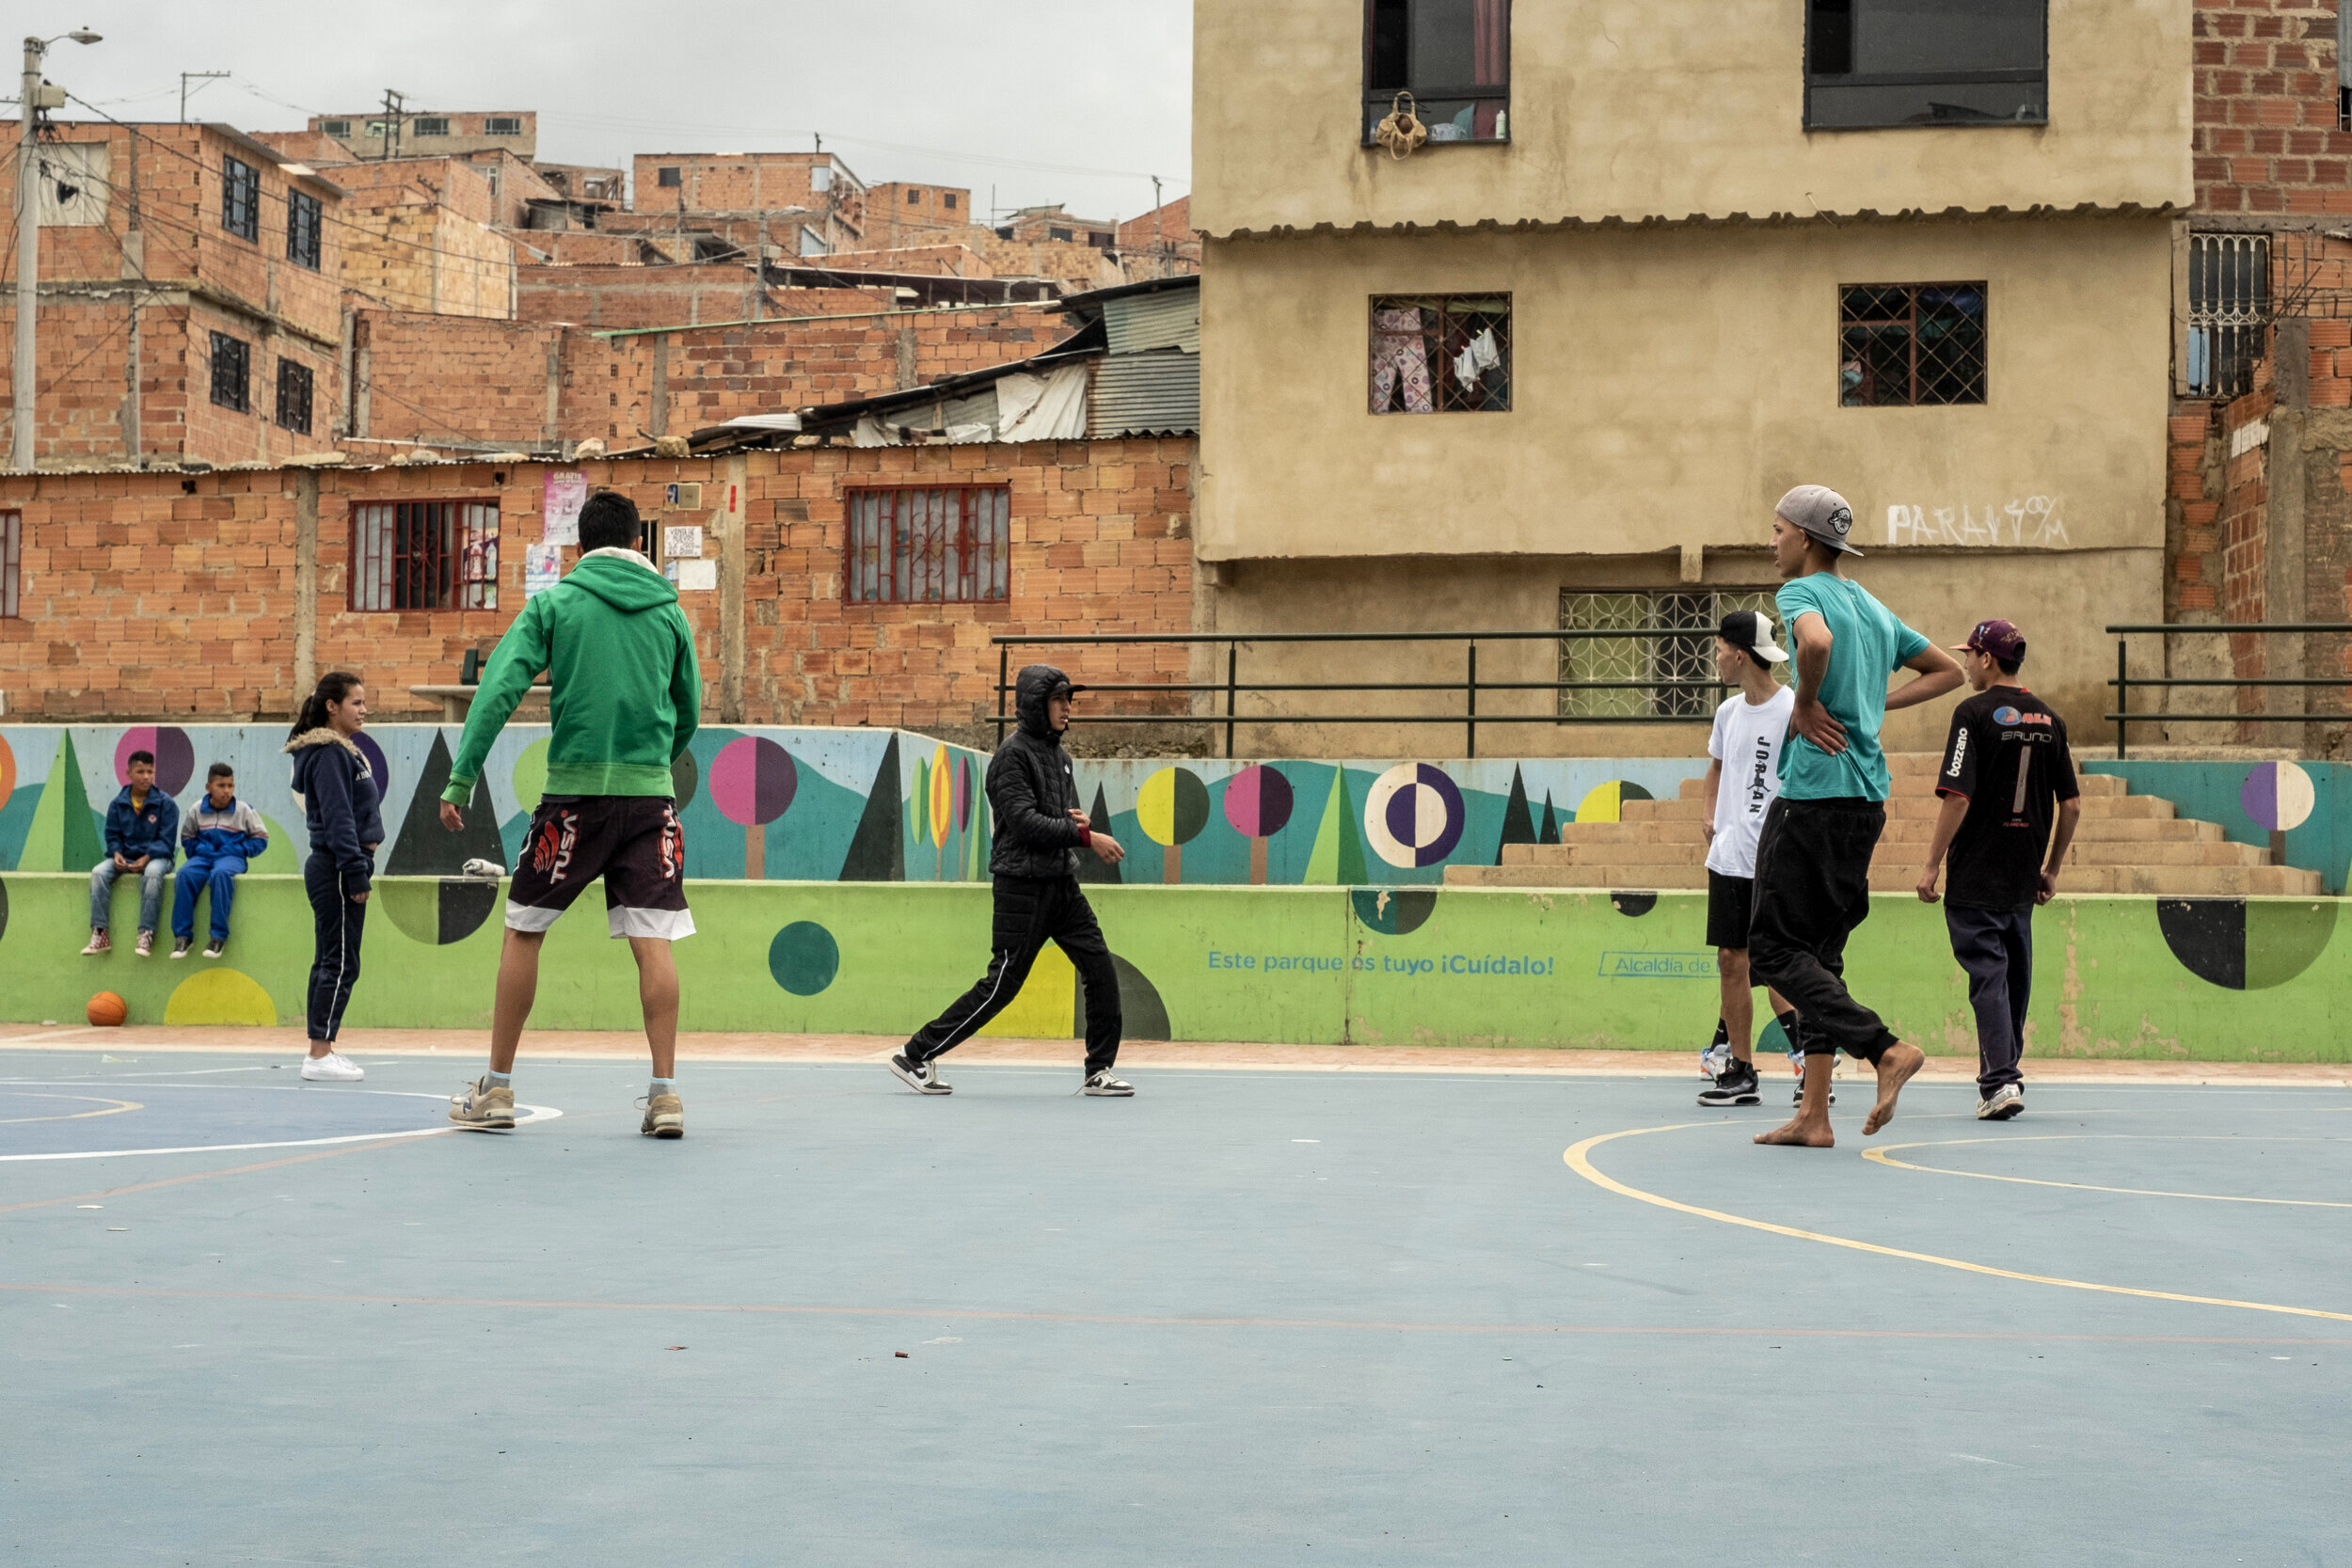  A group of young Venezuelans play soccer on a new concrete pitch in Illimani Park in the El Paraíso neighborhood in Ciudad Bolivar, Bogotá. 